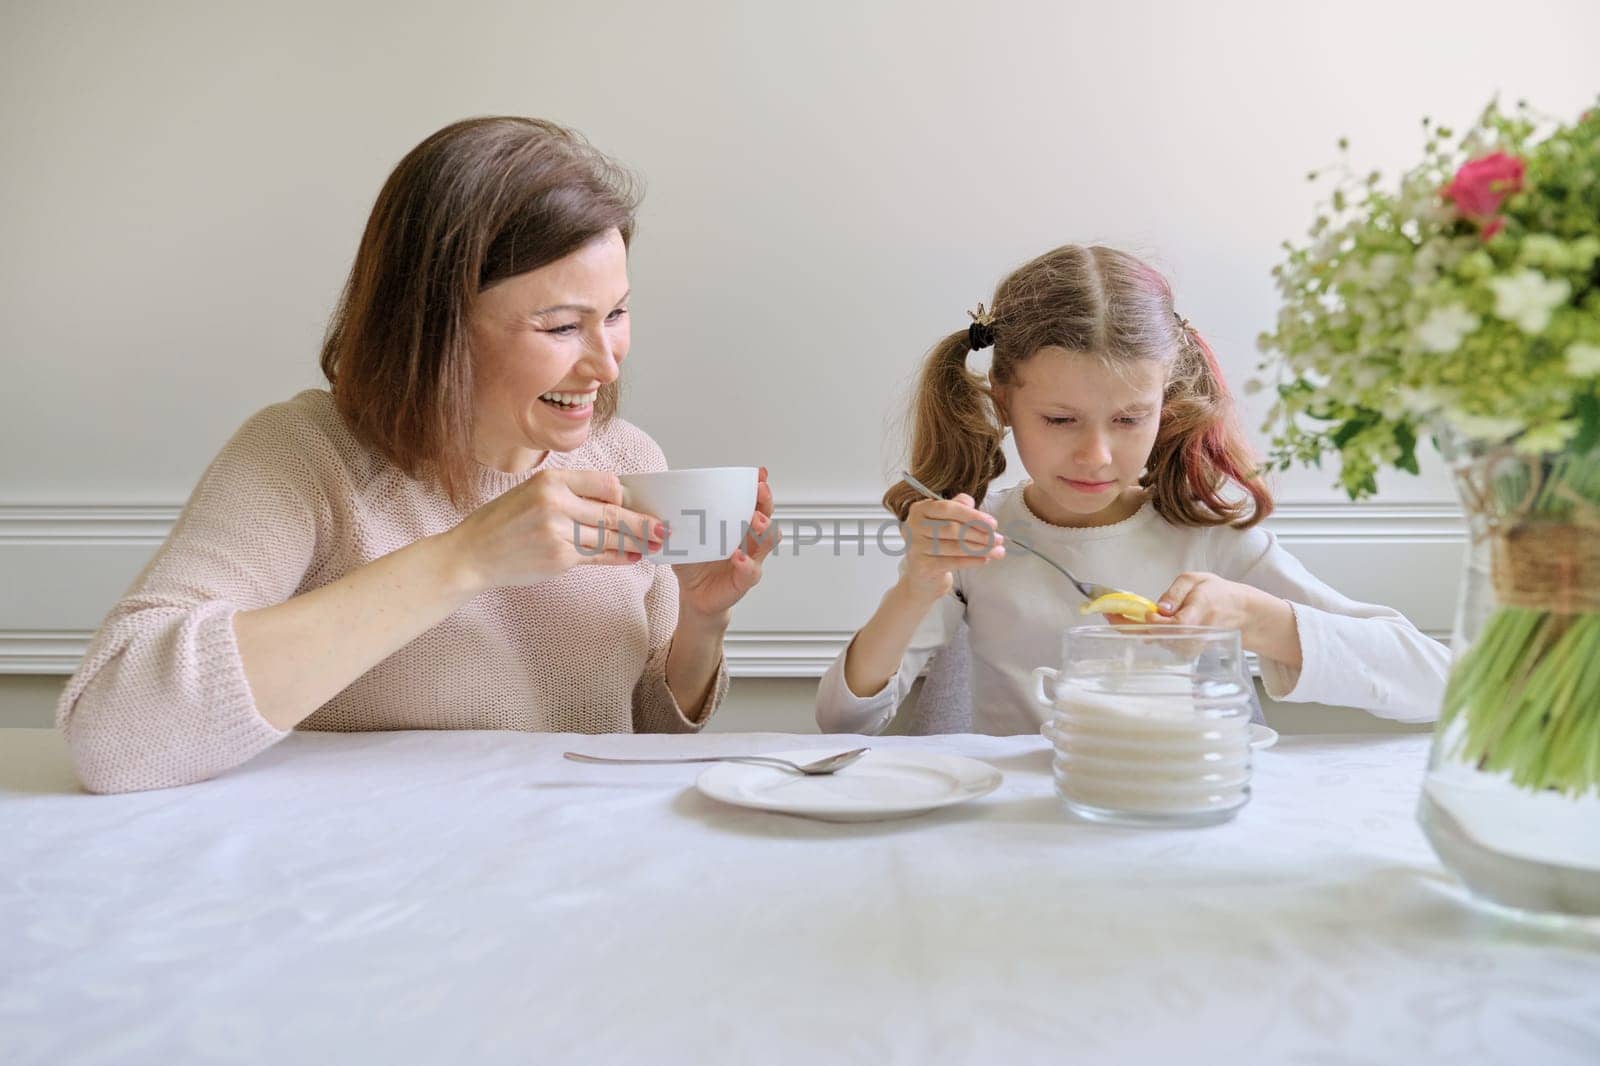 Laughing mother and little daughter, sitting at home at the table drinking from cups and eating lemon. Parent and child having fun and talking